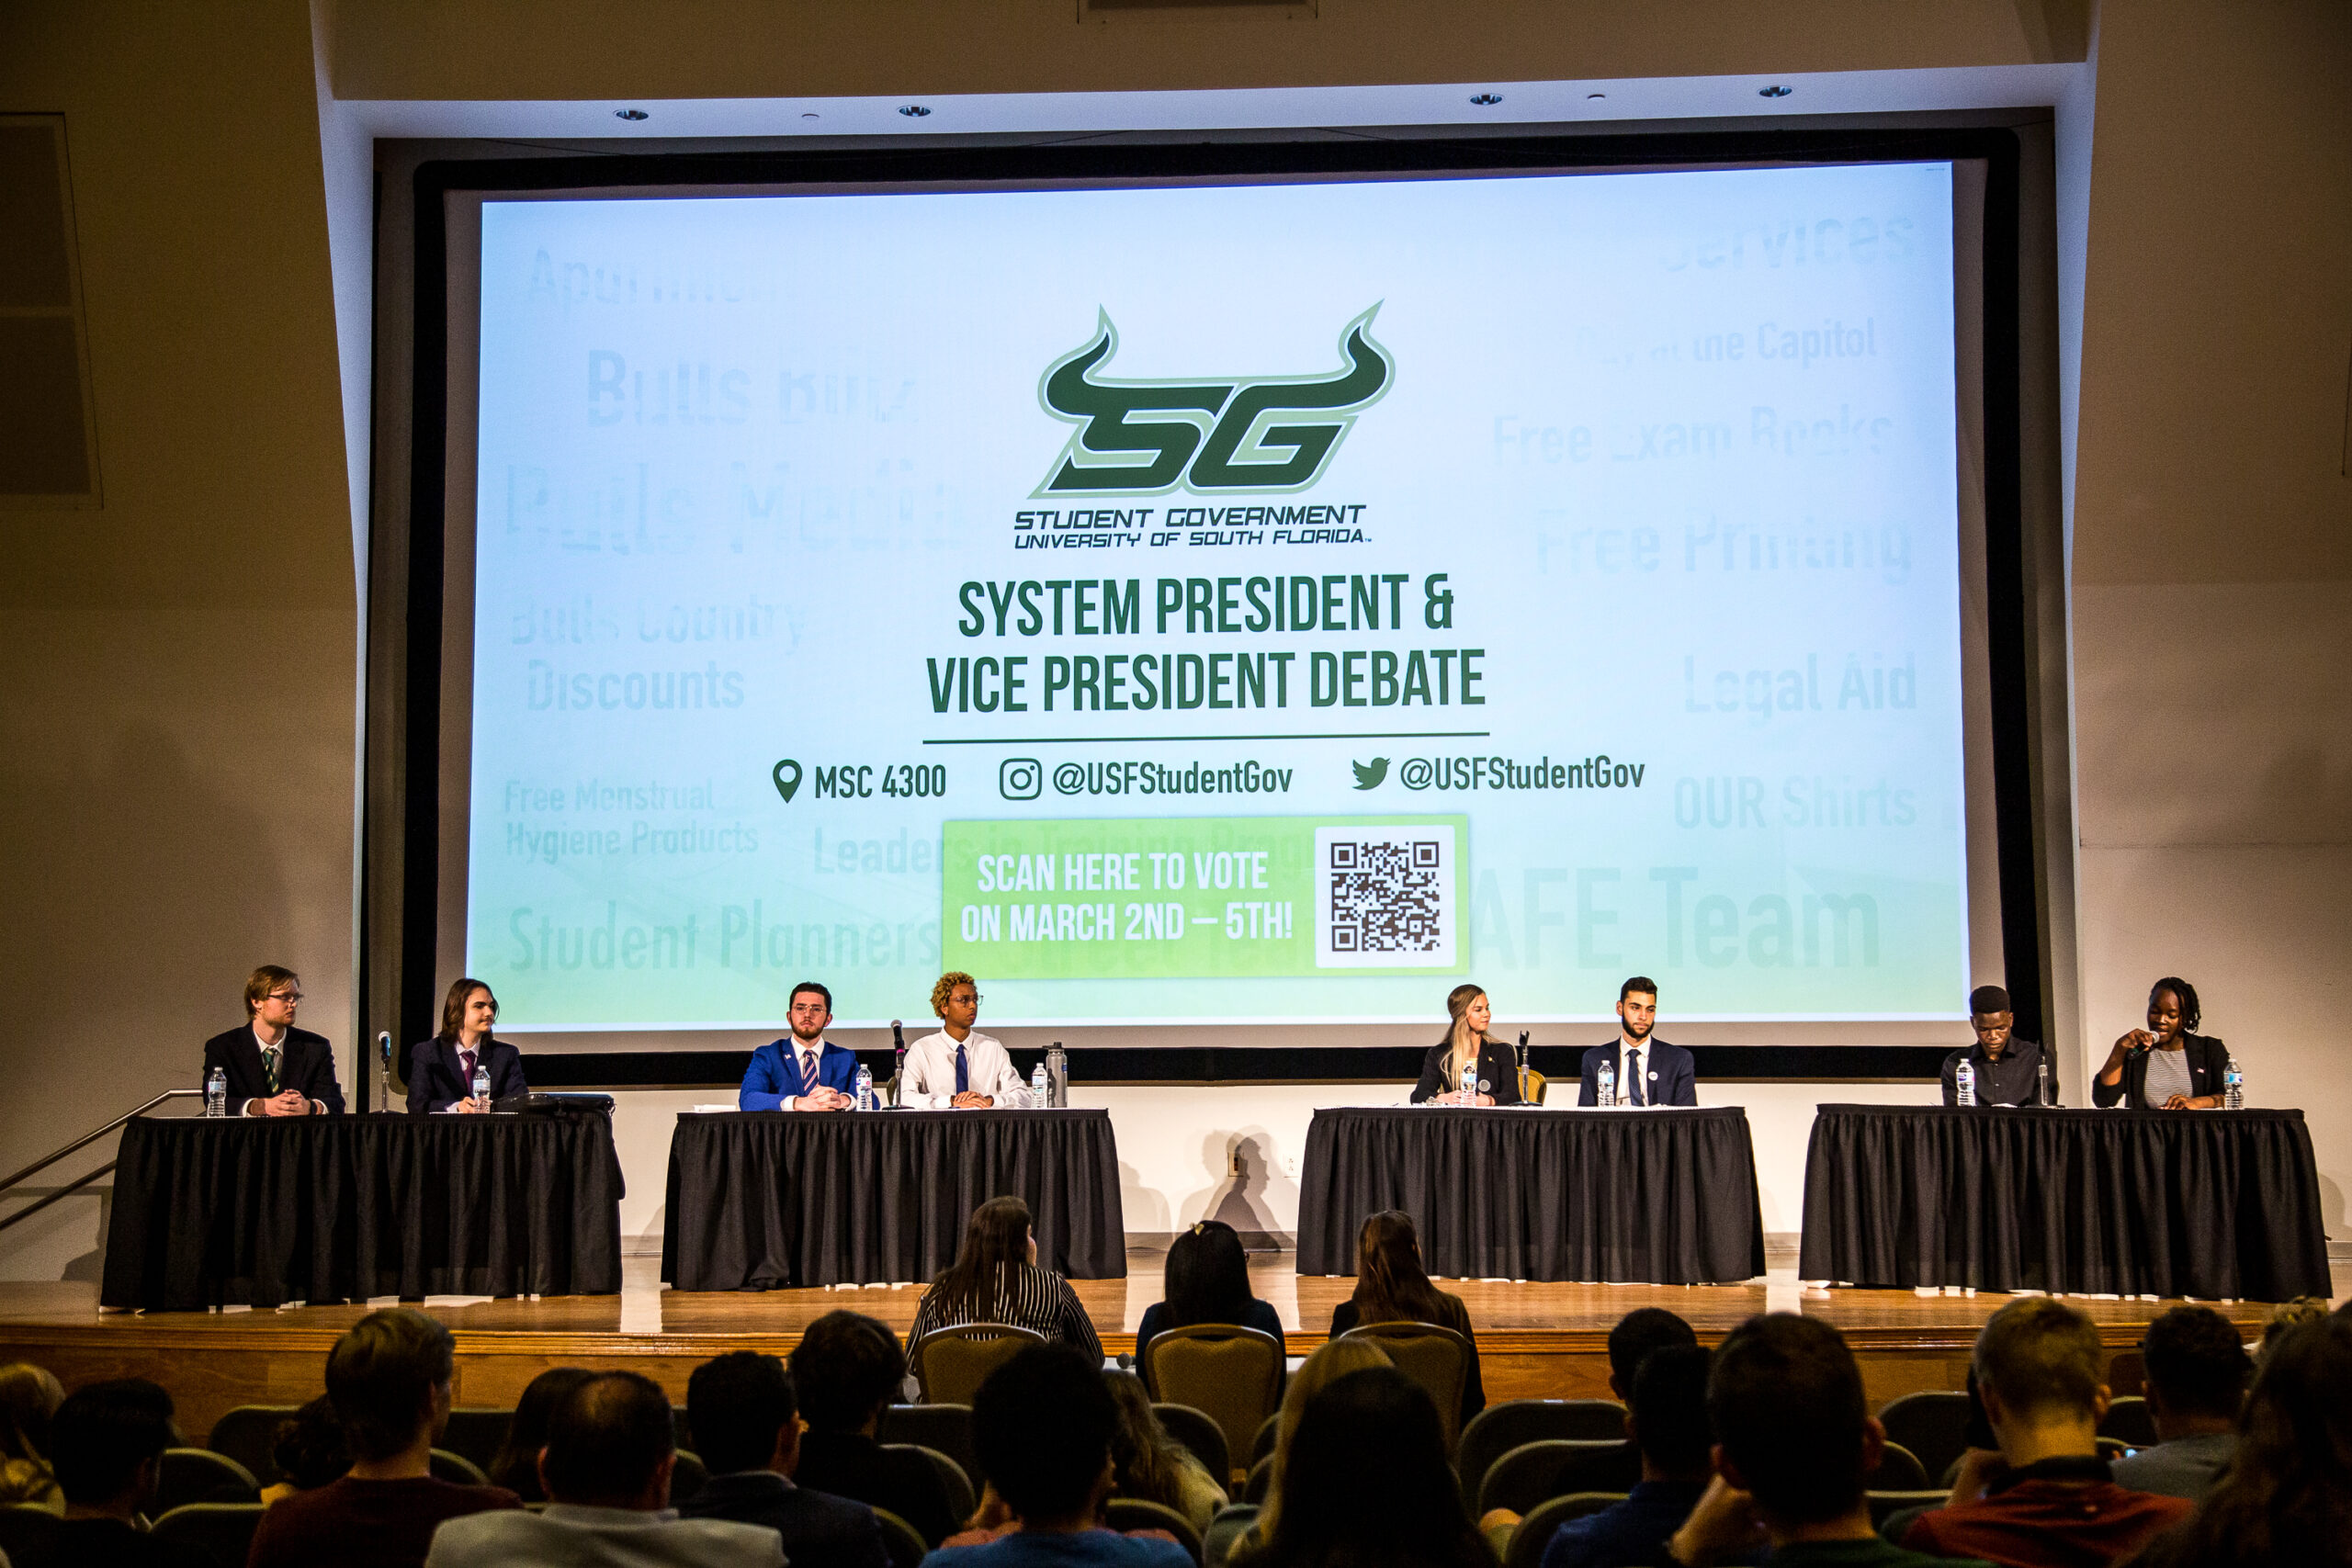 SG presidential debate features shallow questions and conflicts of interest